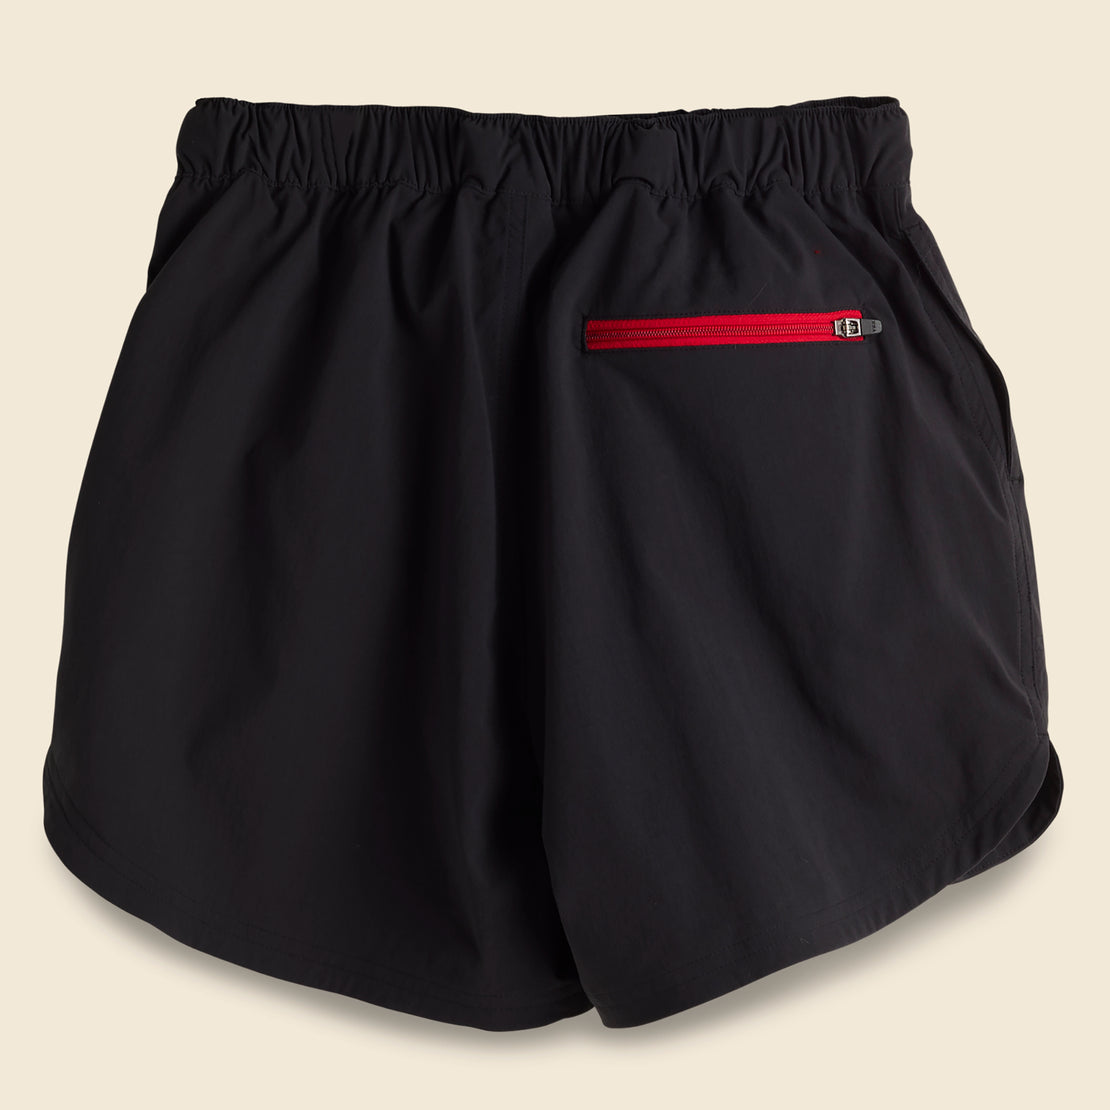 Women's River Shorts - Black - Topo Designs - STAG Provisions - W - Shorts - Other